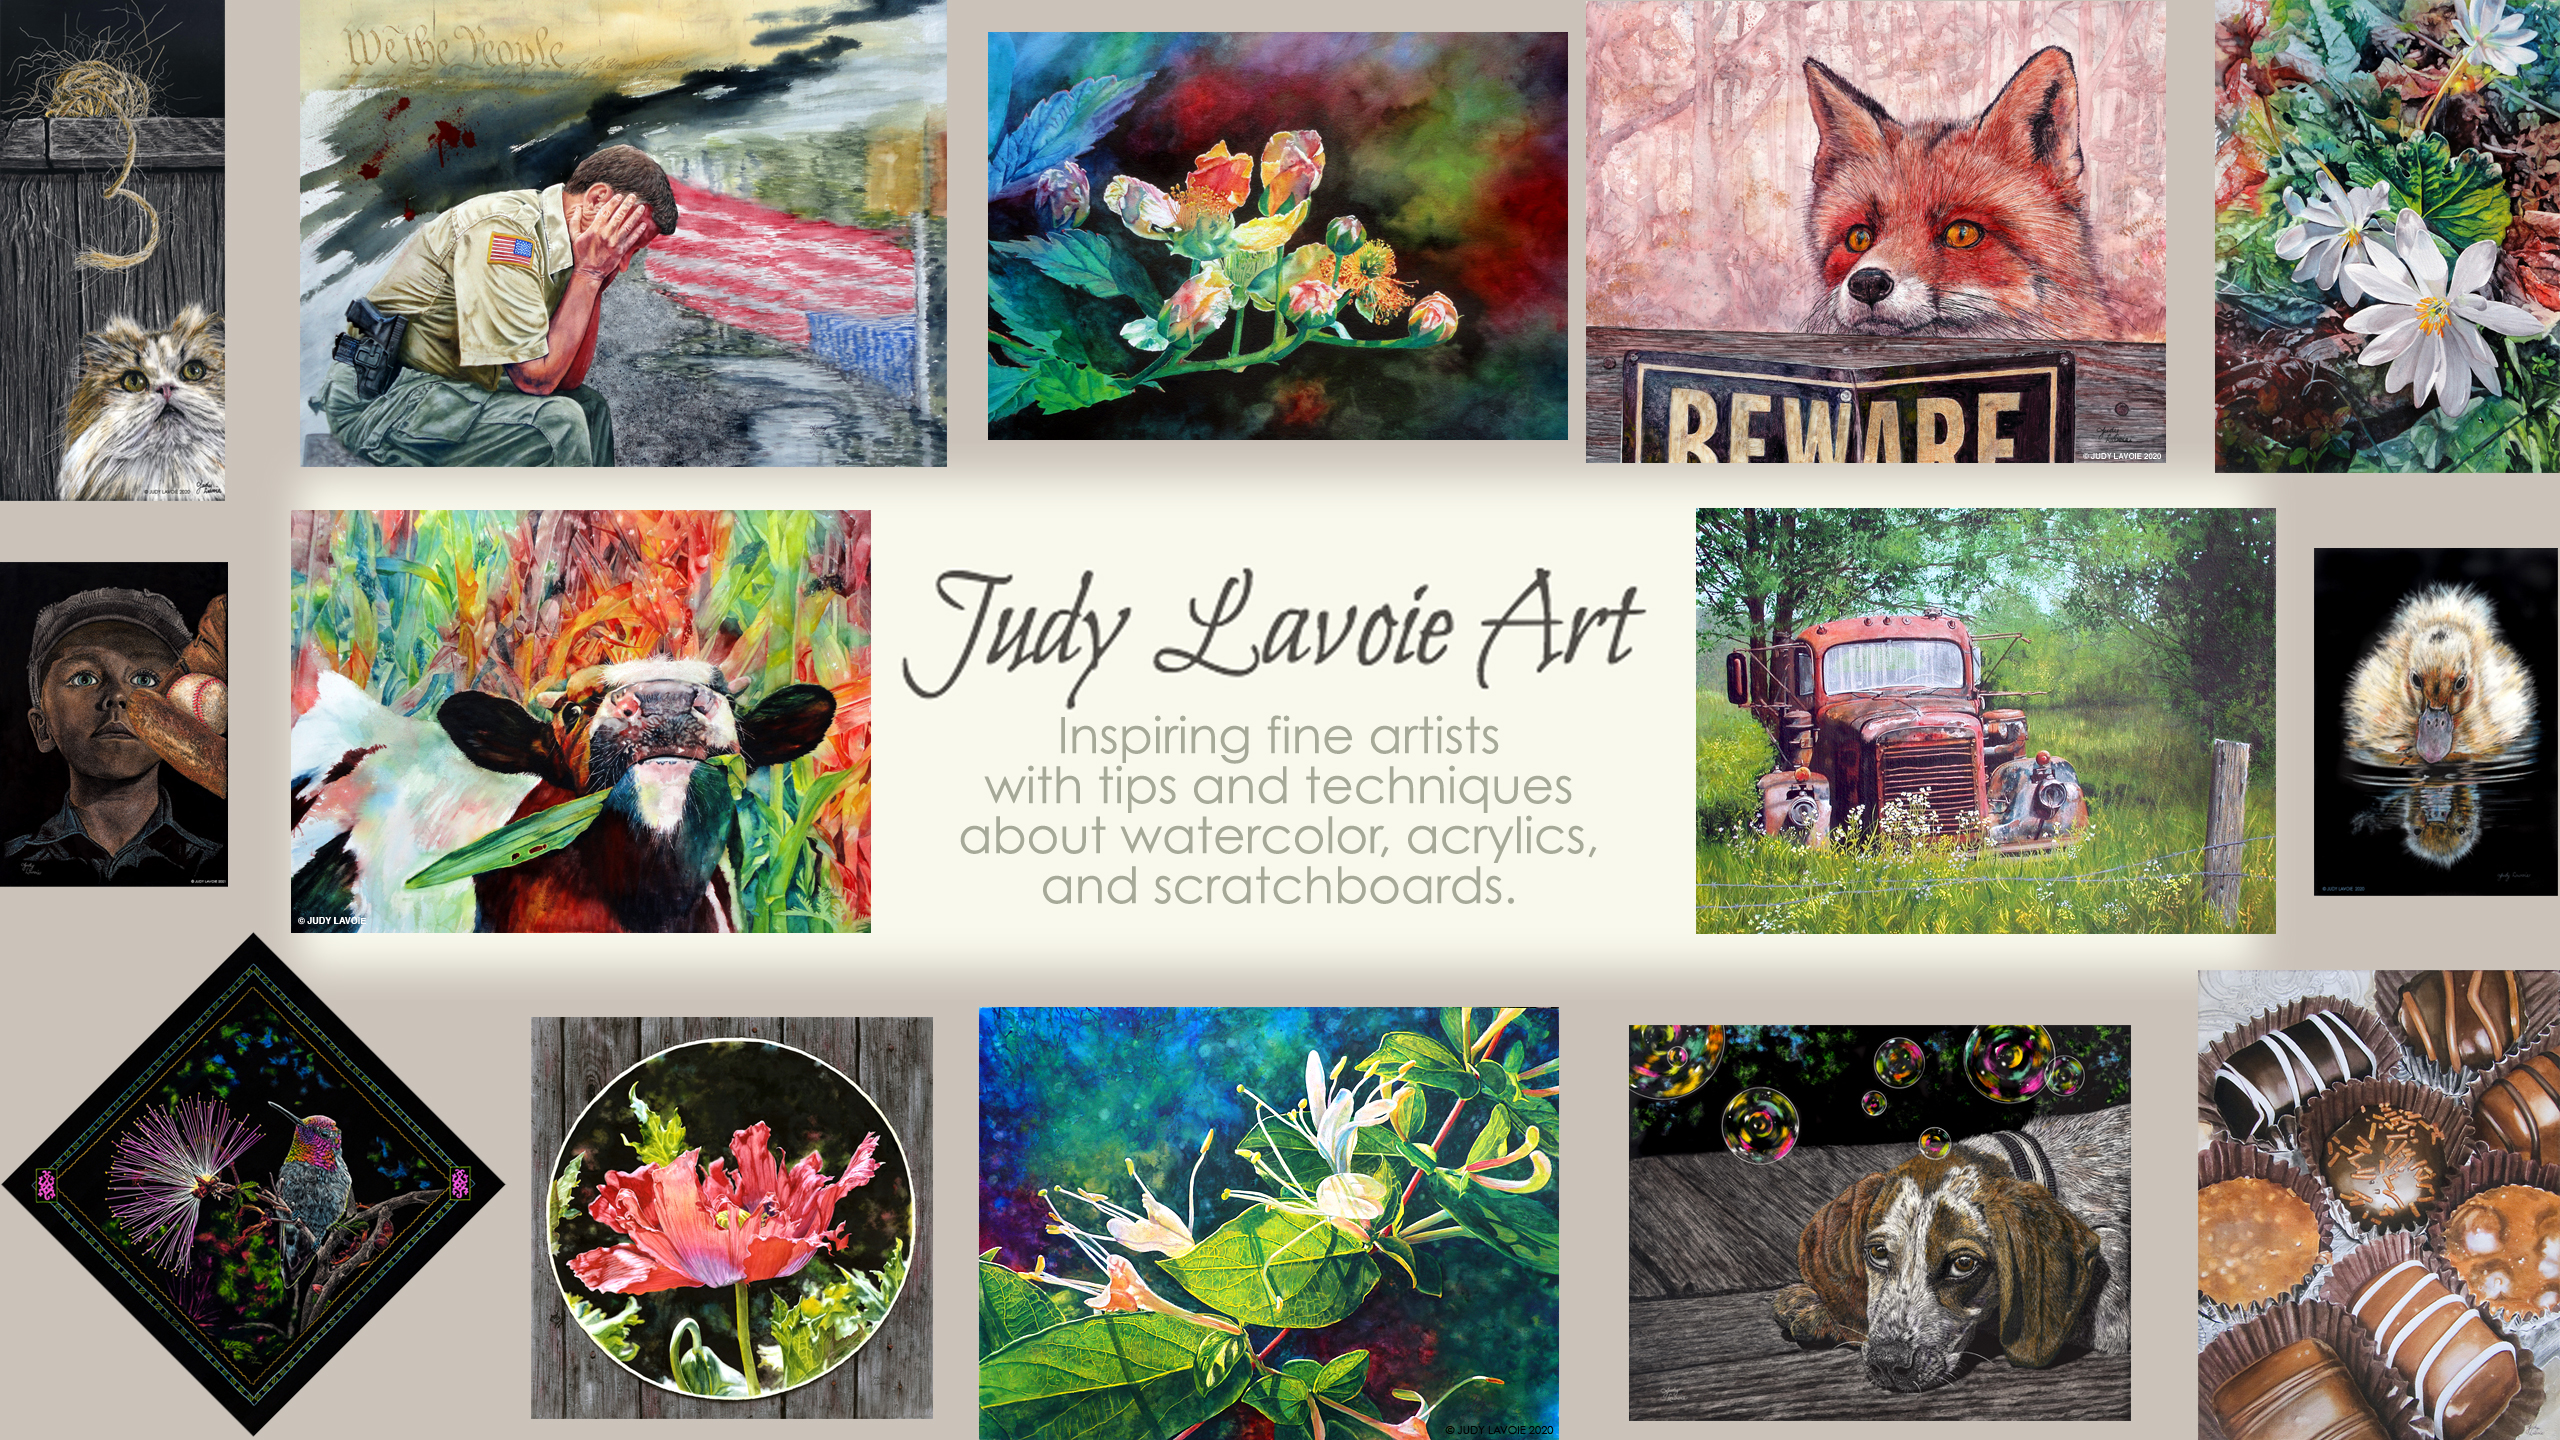 YouTUbe banner for Judy Lavoie Art channel